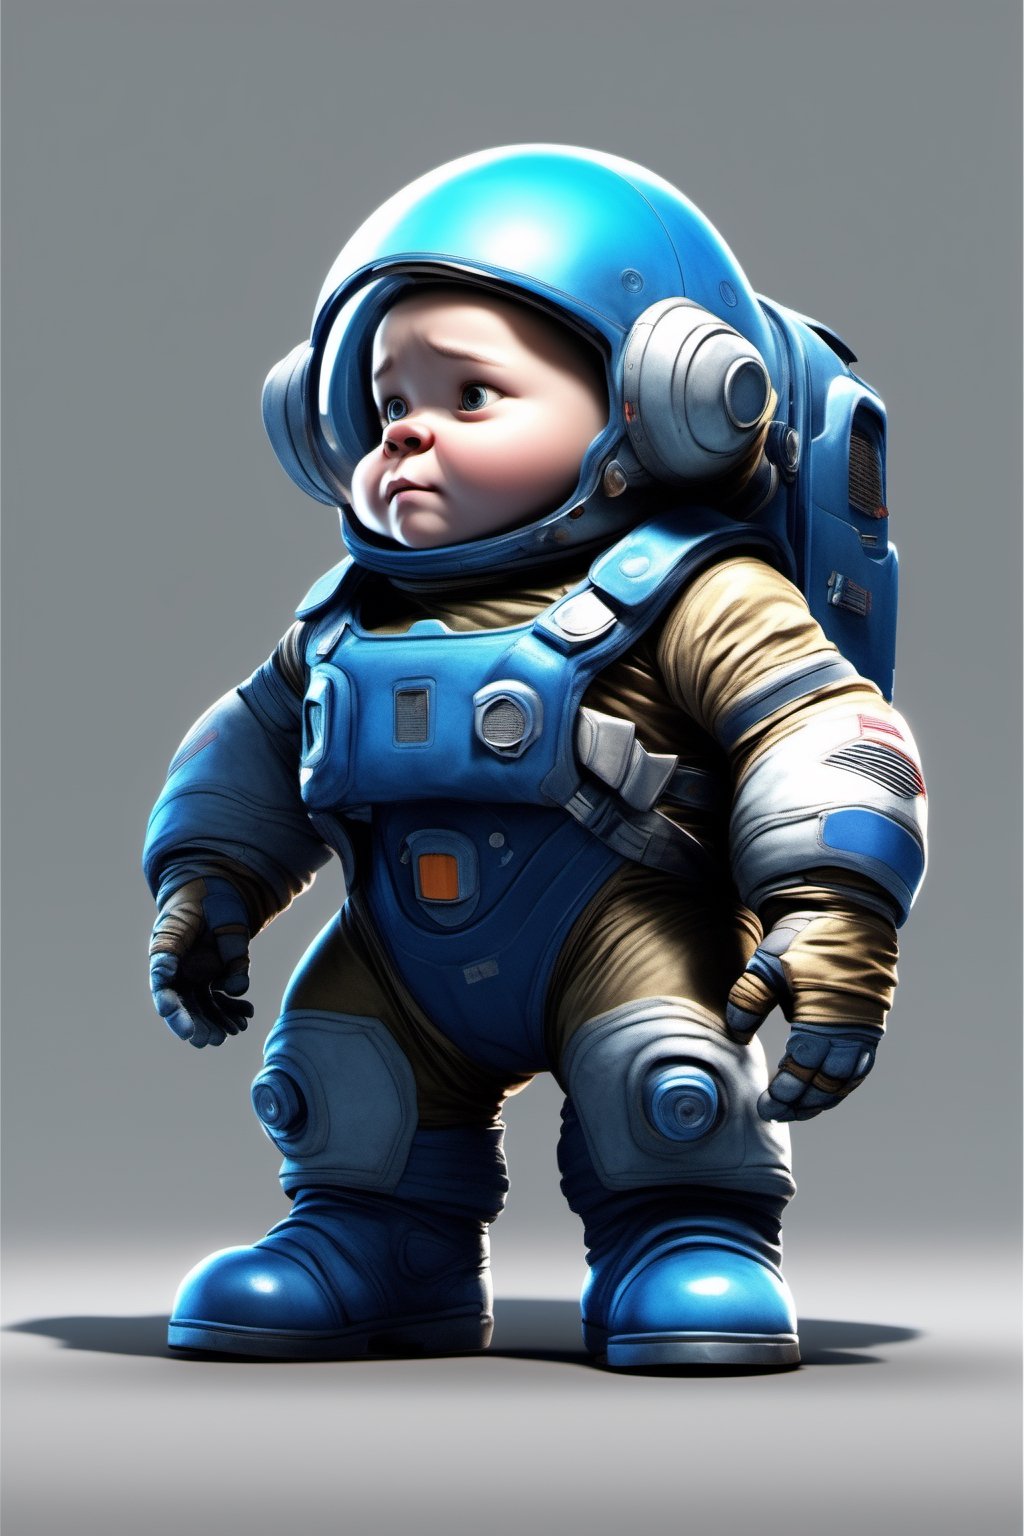 Cartoon character, 12 years old, 3d, no nose, blue color, cute, dwarf, pixar style, hold gun, astronaut suit, stand alone, full body, photo realistic, shuted helmet, high tech, sophisticated 